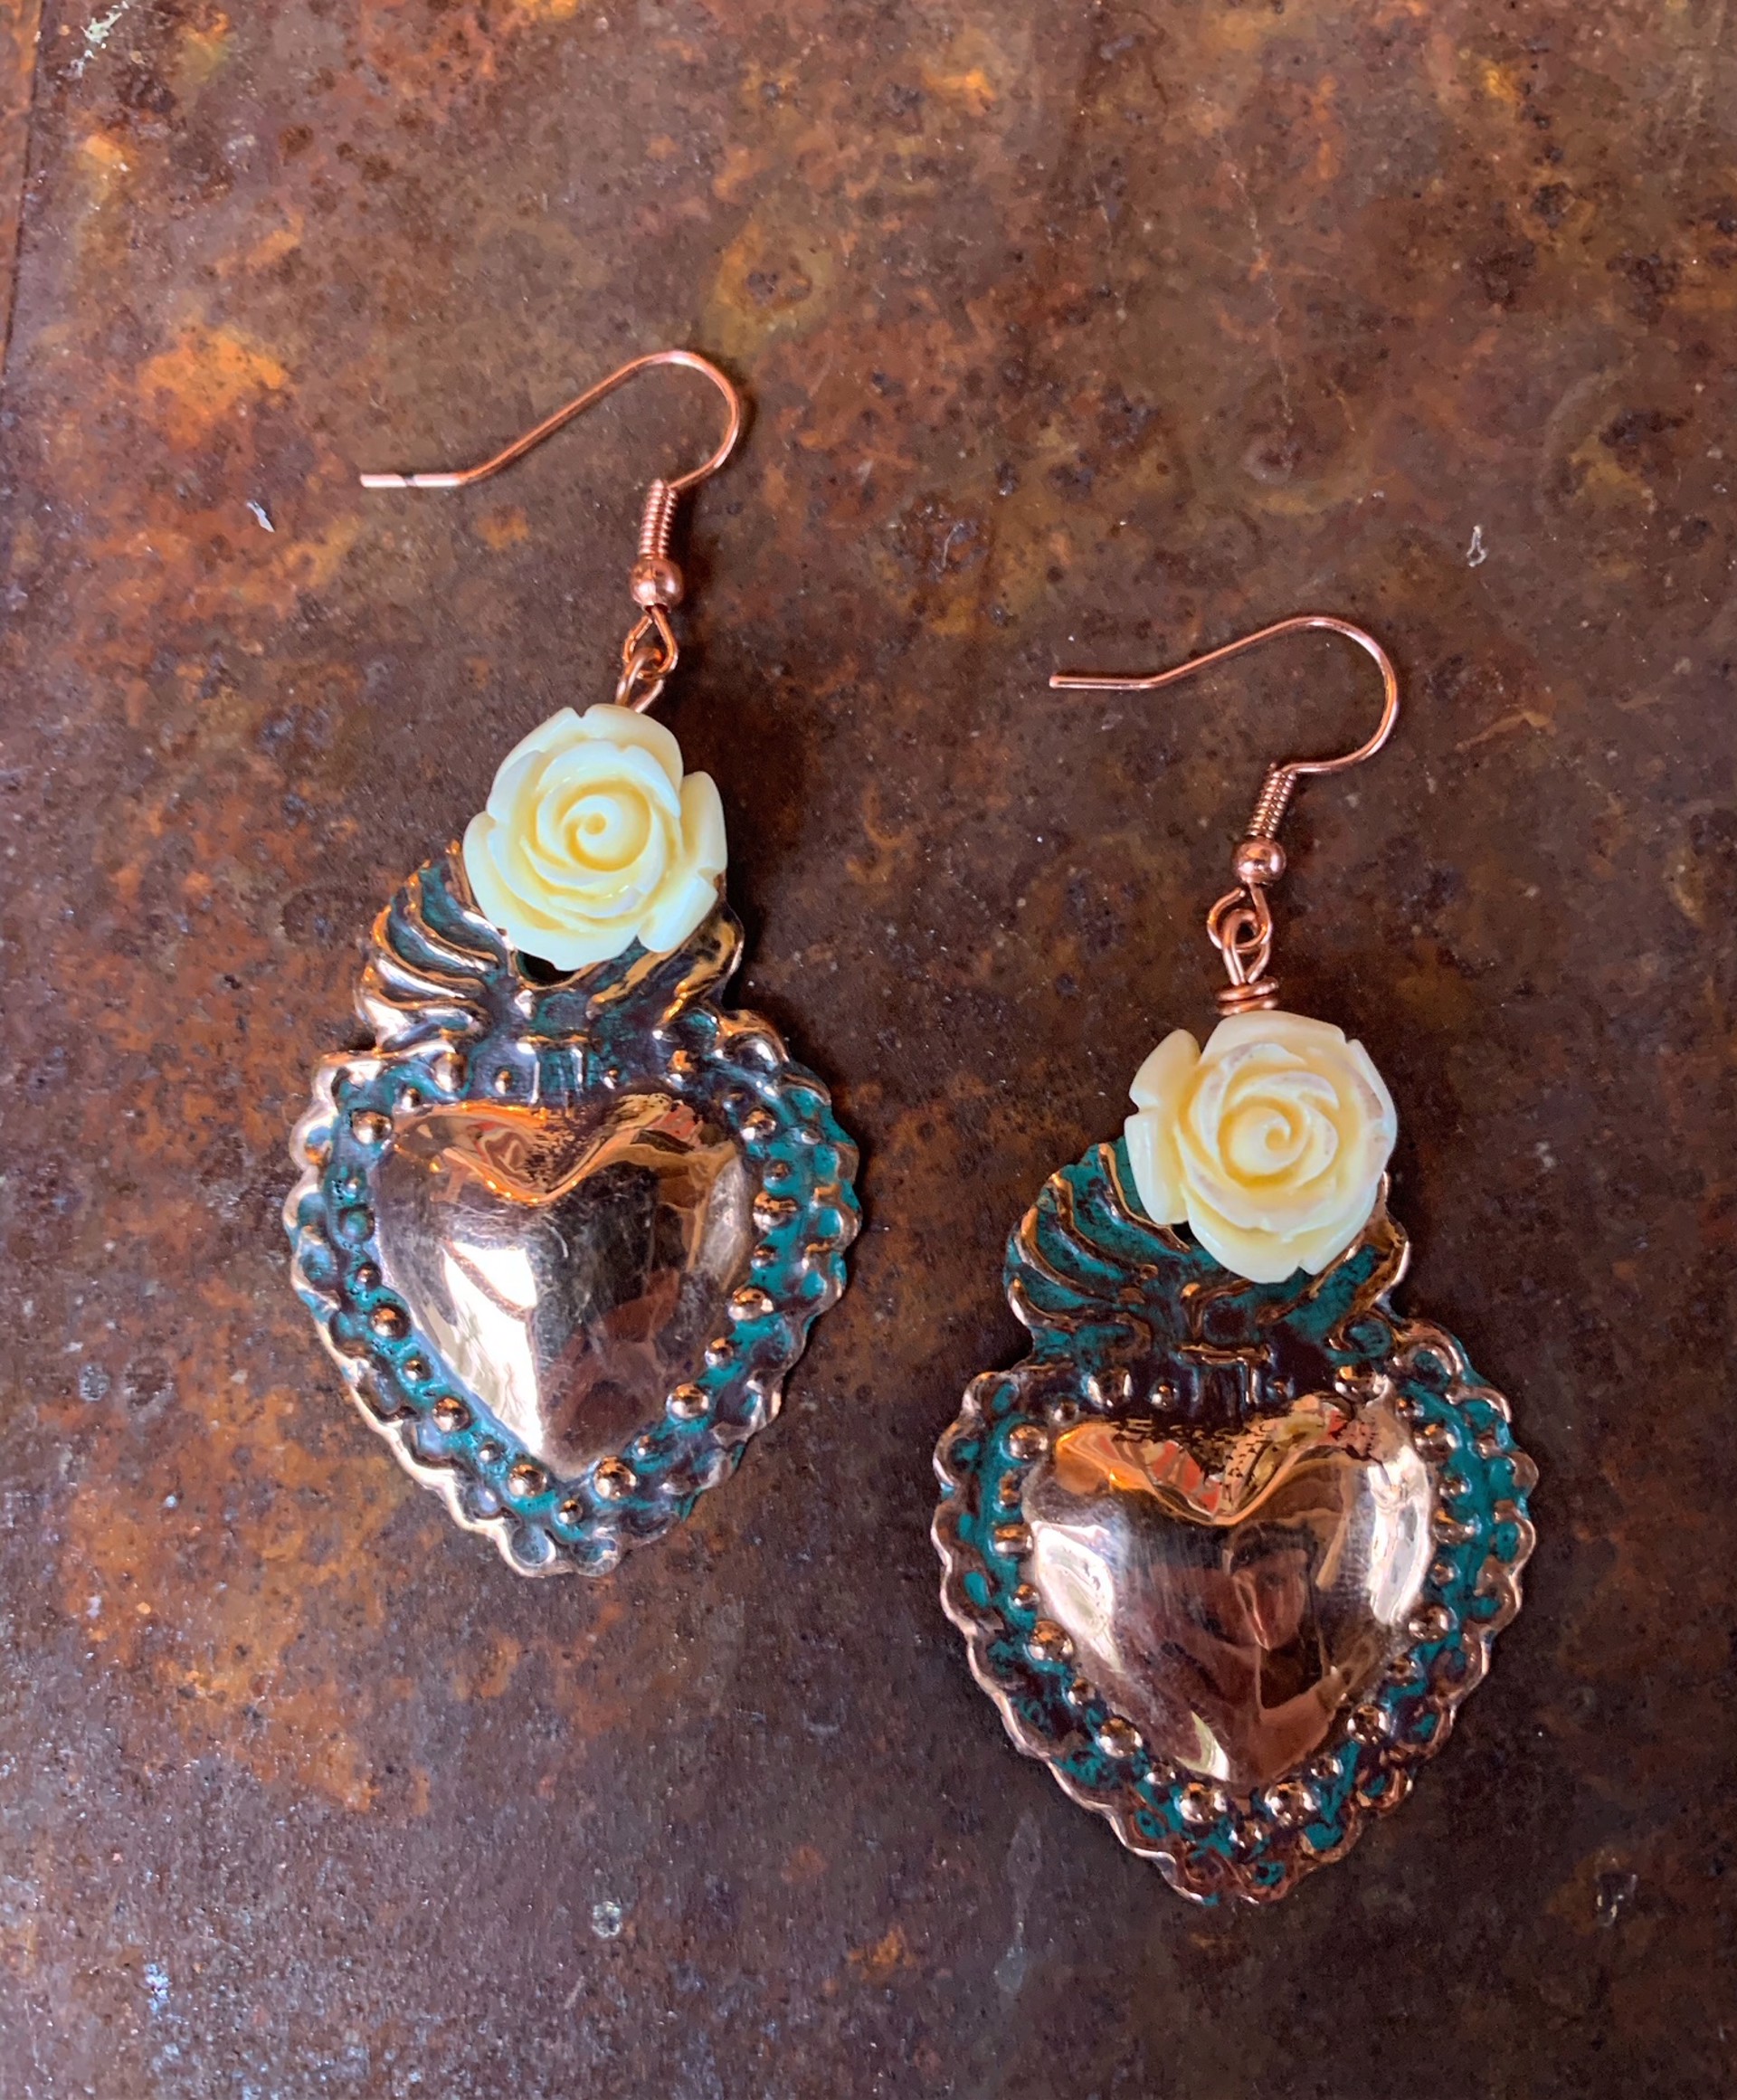 K785 Small Sacred Heart Earrings with White Roses by Kelly Ormsby